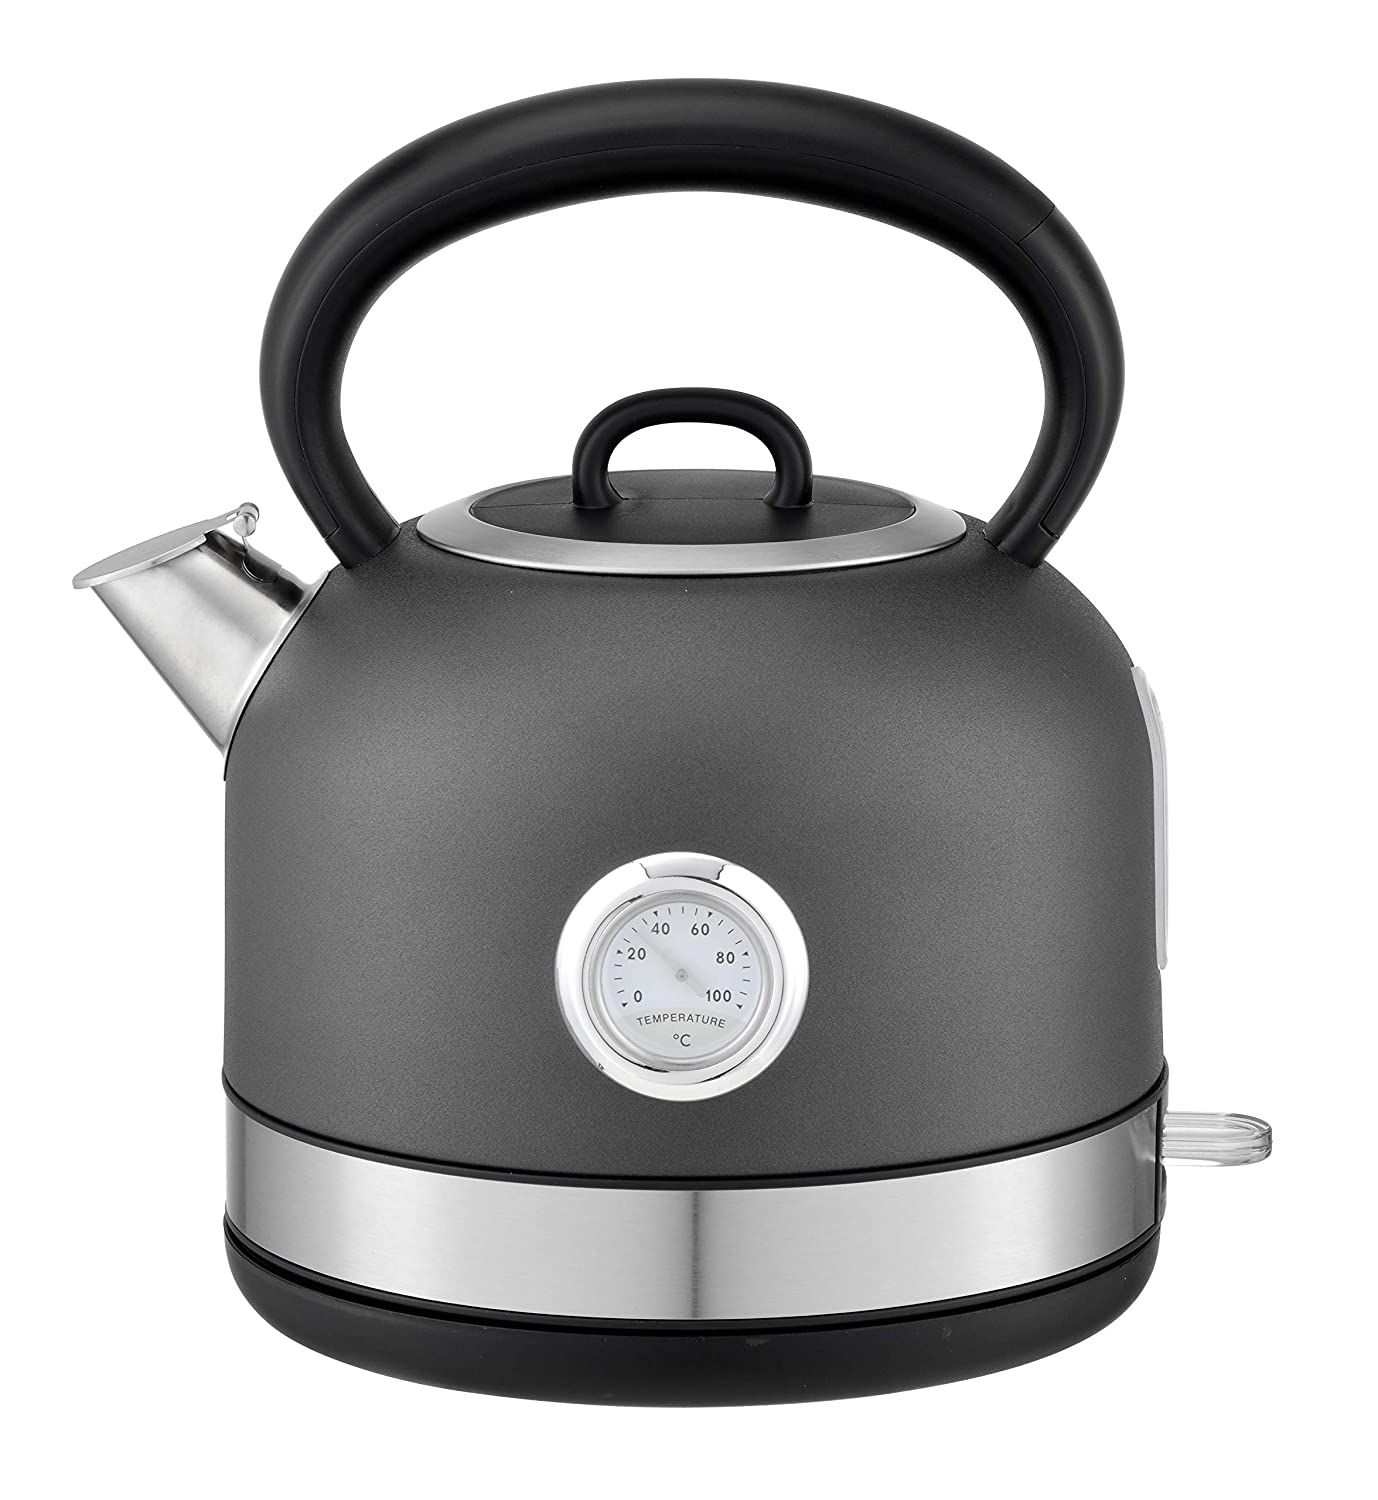 Hafele Dome Electric Stainless Steel Kettle with spout cover with Analogue Temperature Display, 1.7 Litre, Grey - Mahajan Electronics Online